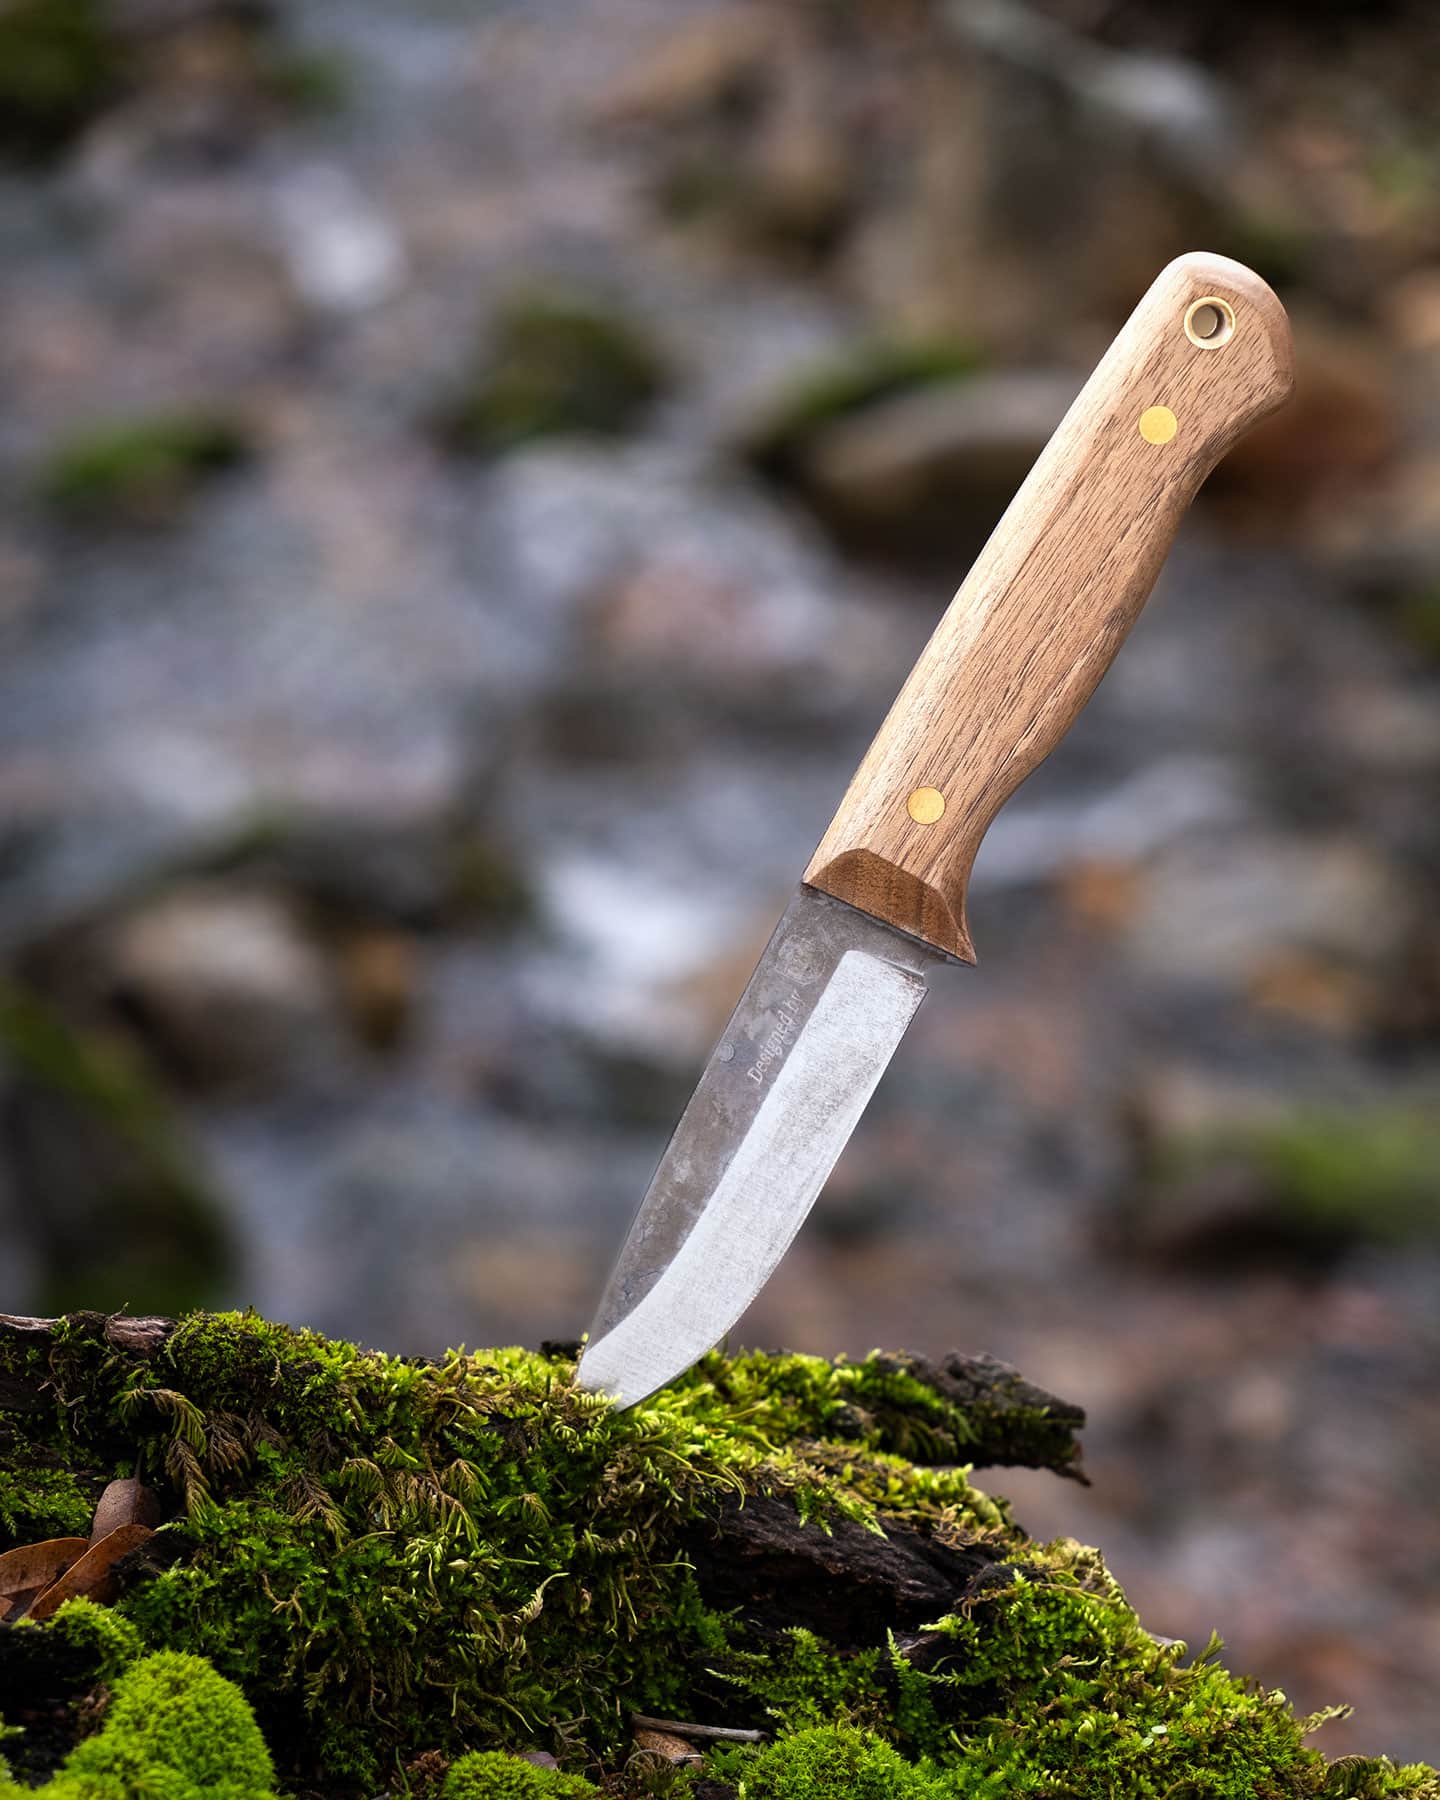 The BPS Bushmate won an award for Best Bushcraft Knife for Poor People.